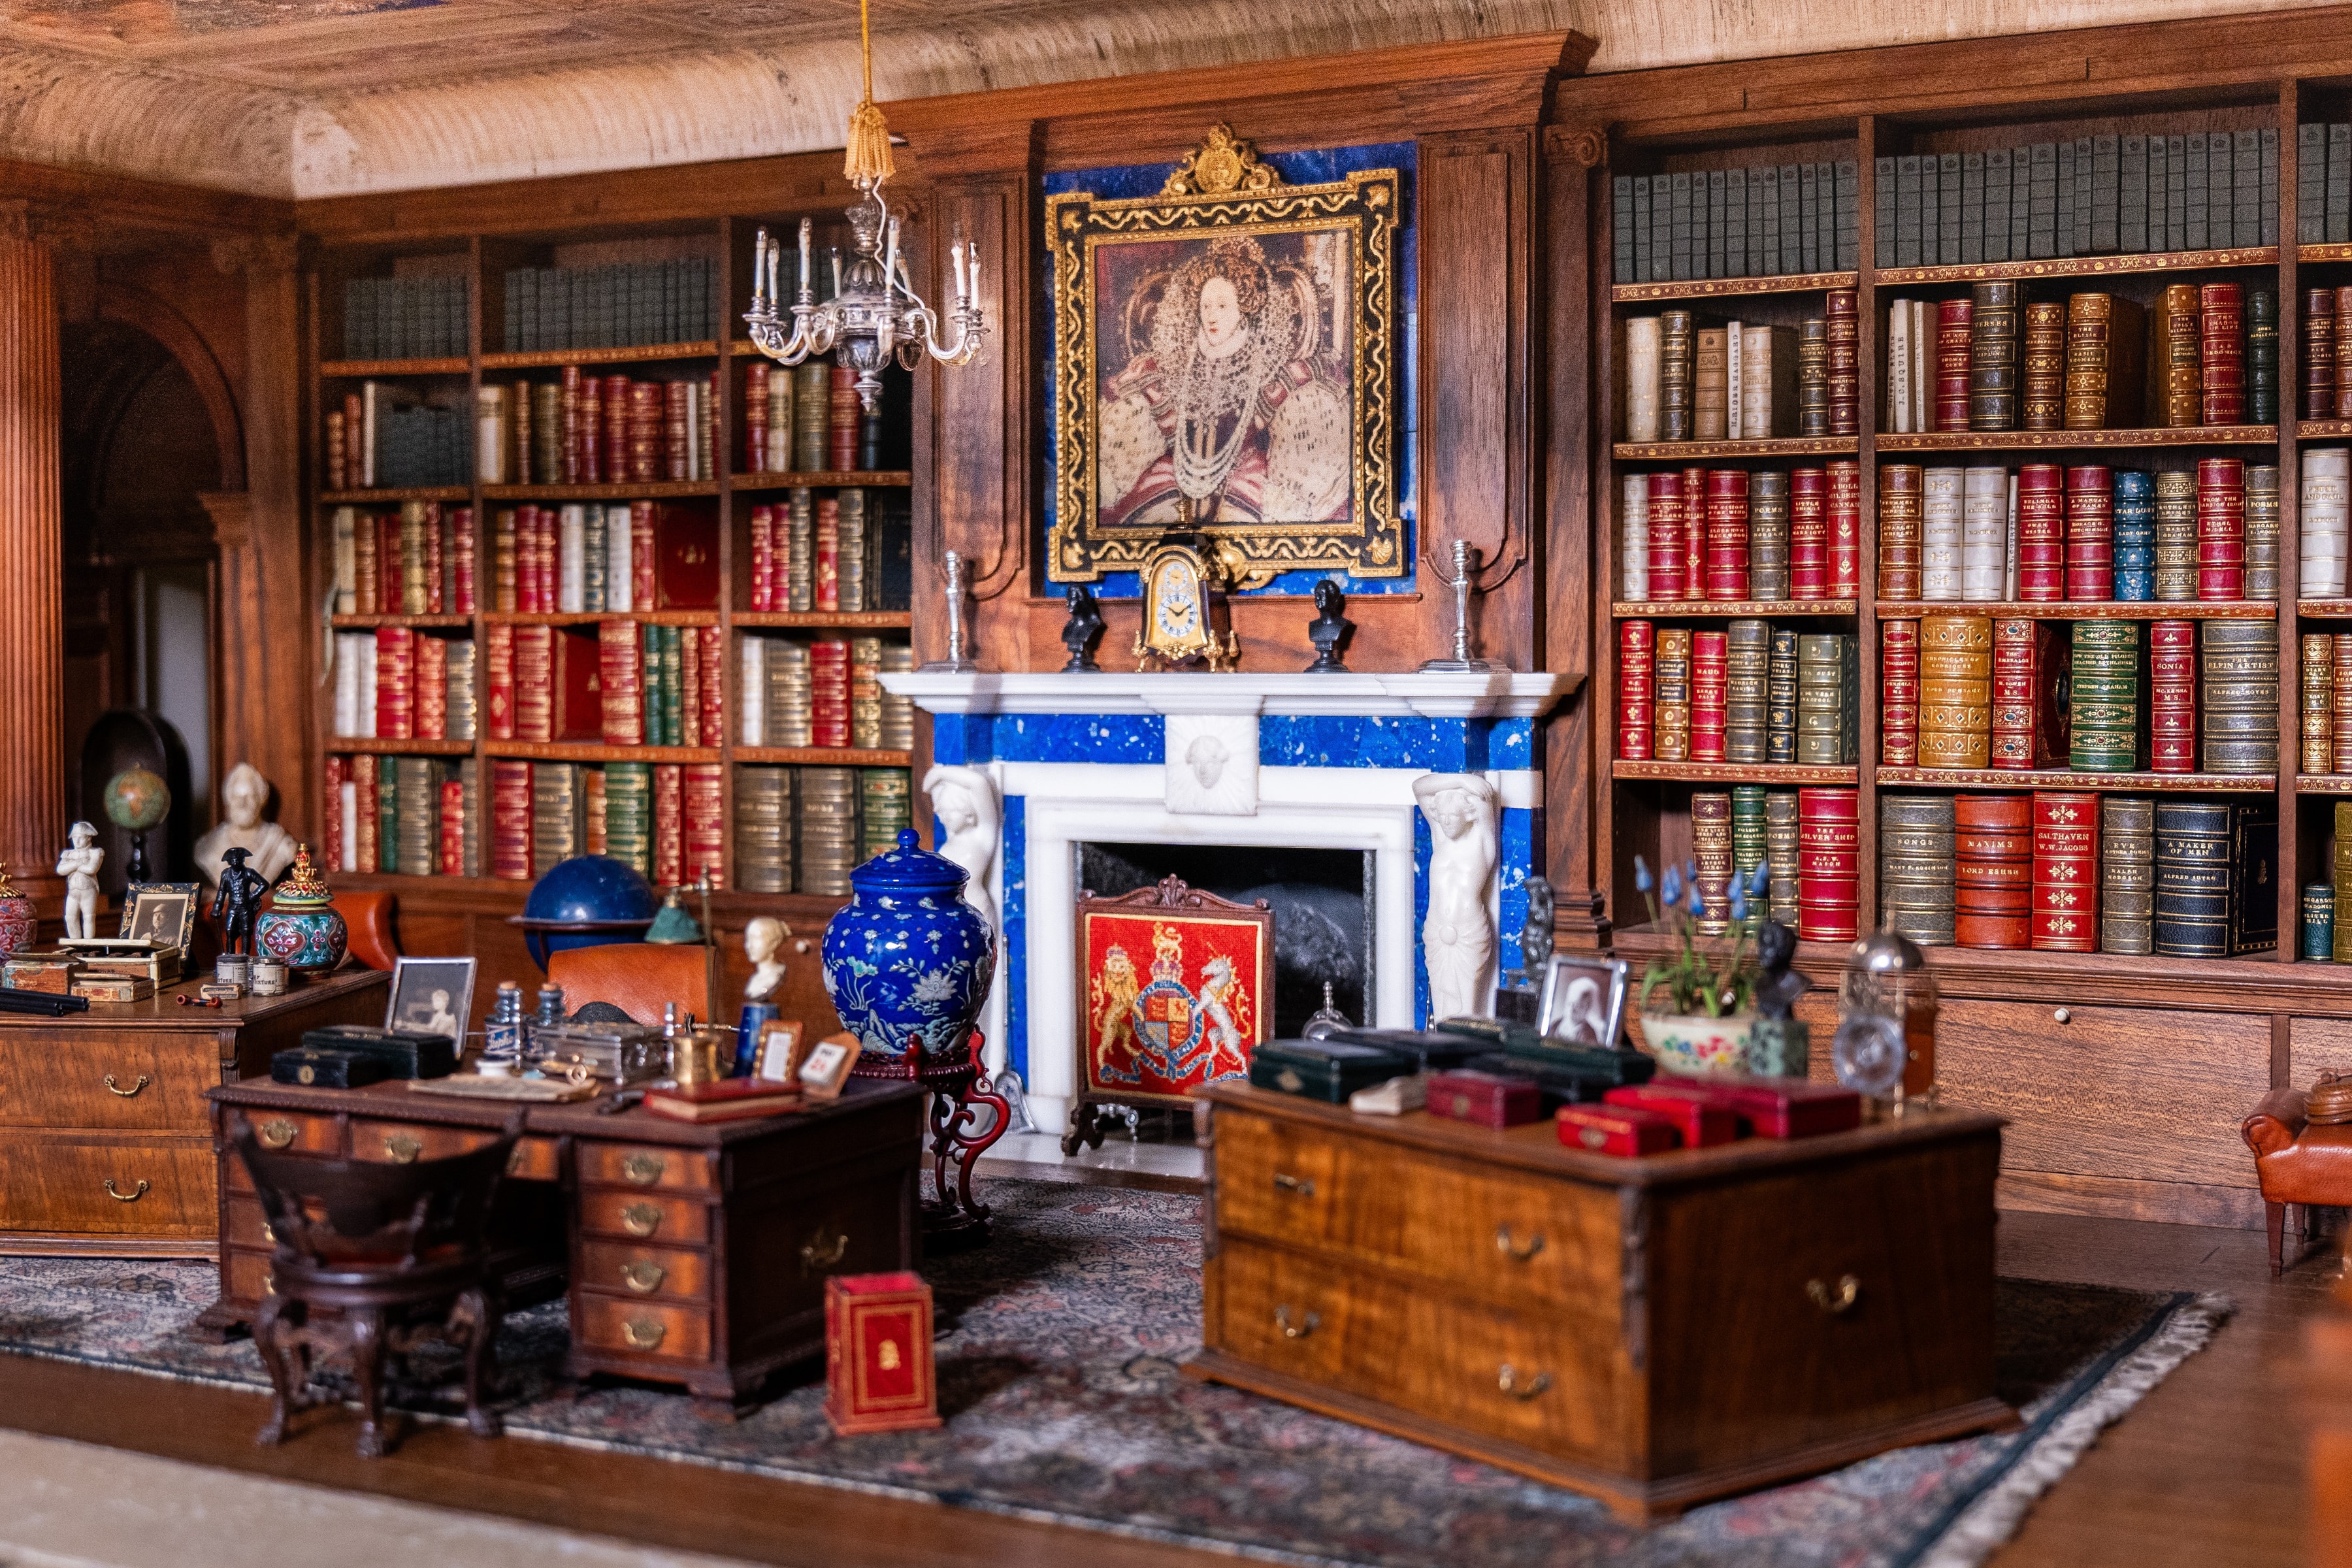 The doll’s house library